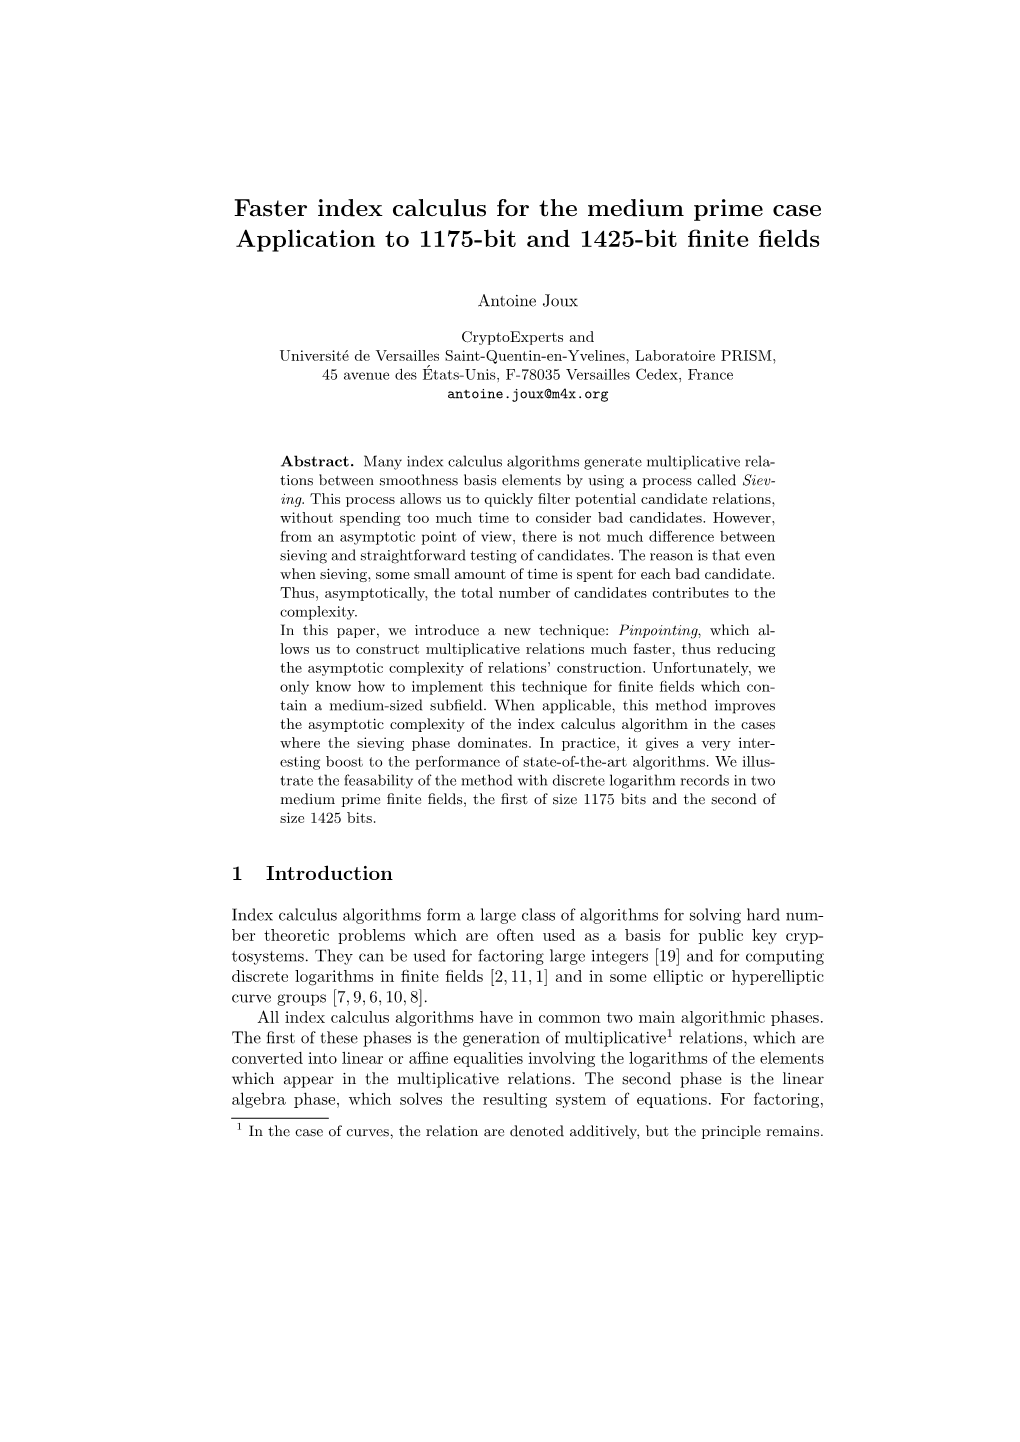 Faster Index Calculus for the Medium Prime Case Application to 1175-Bit and 1425-Bit ﬁnite ﬁelds